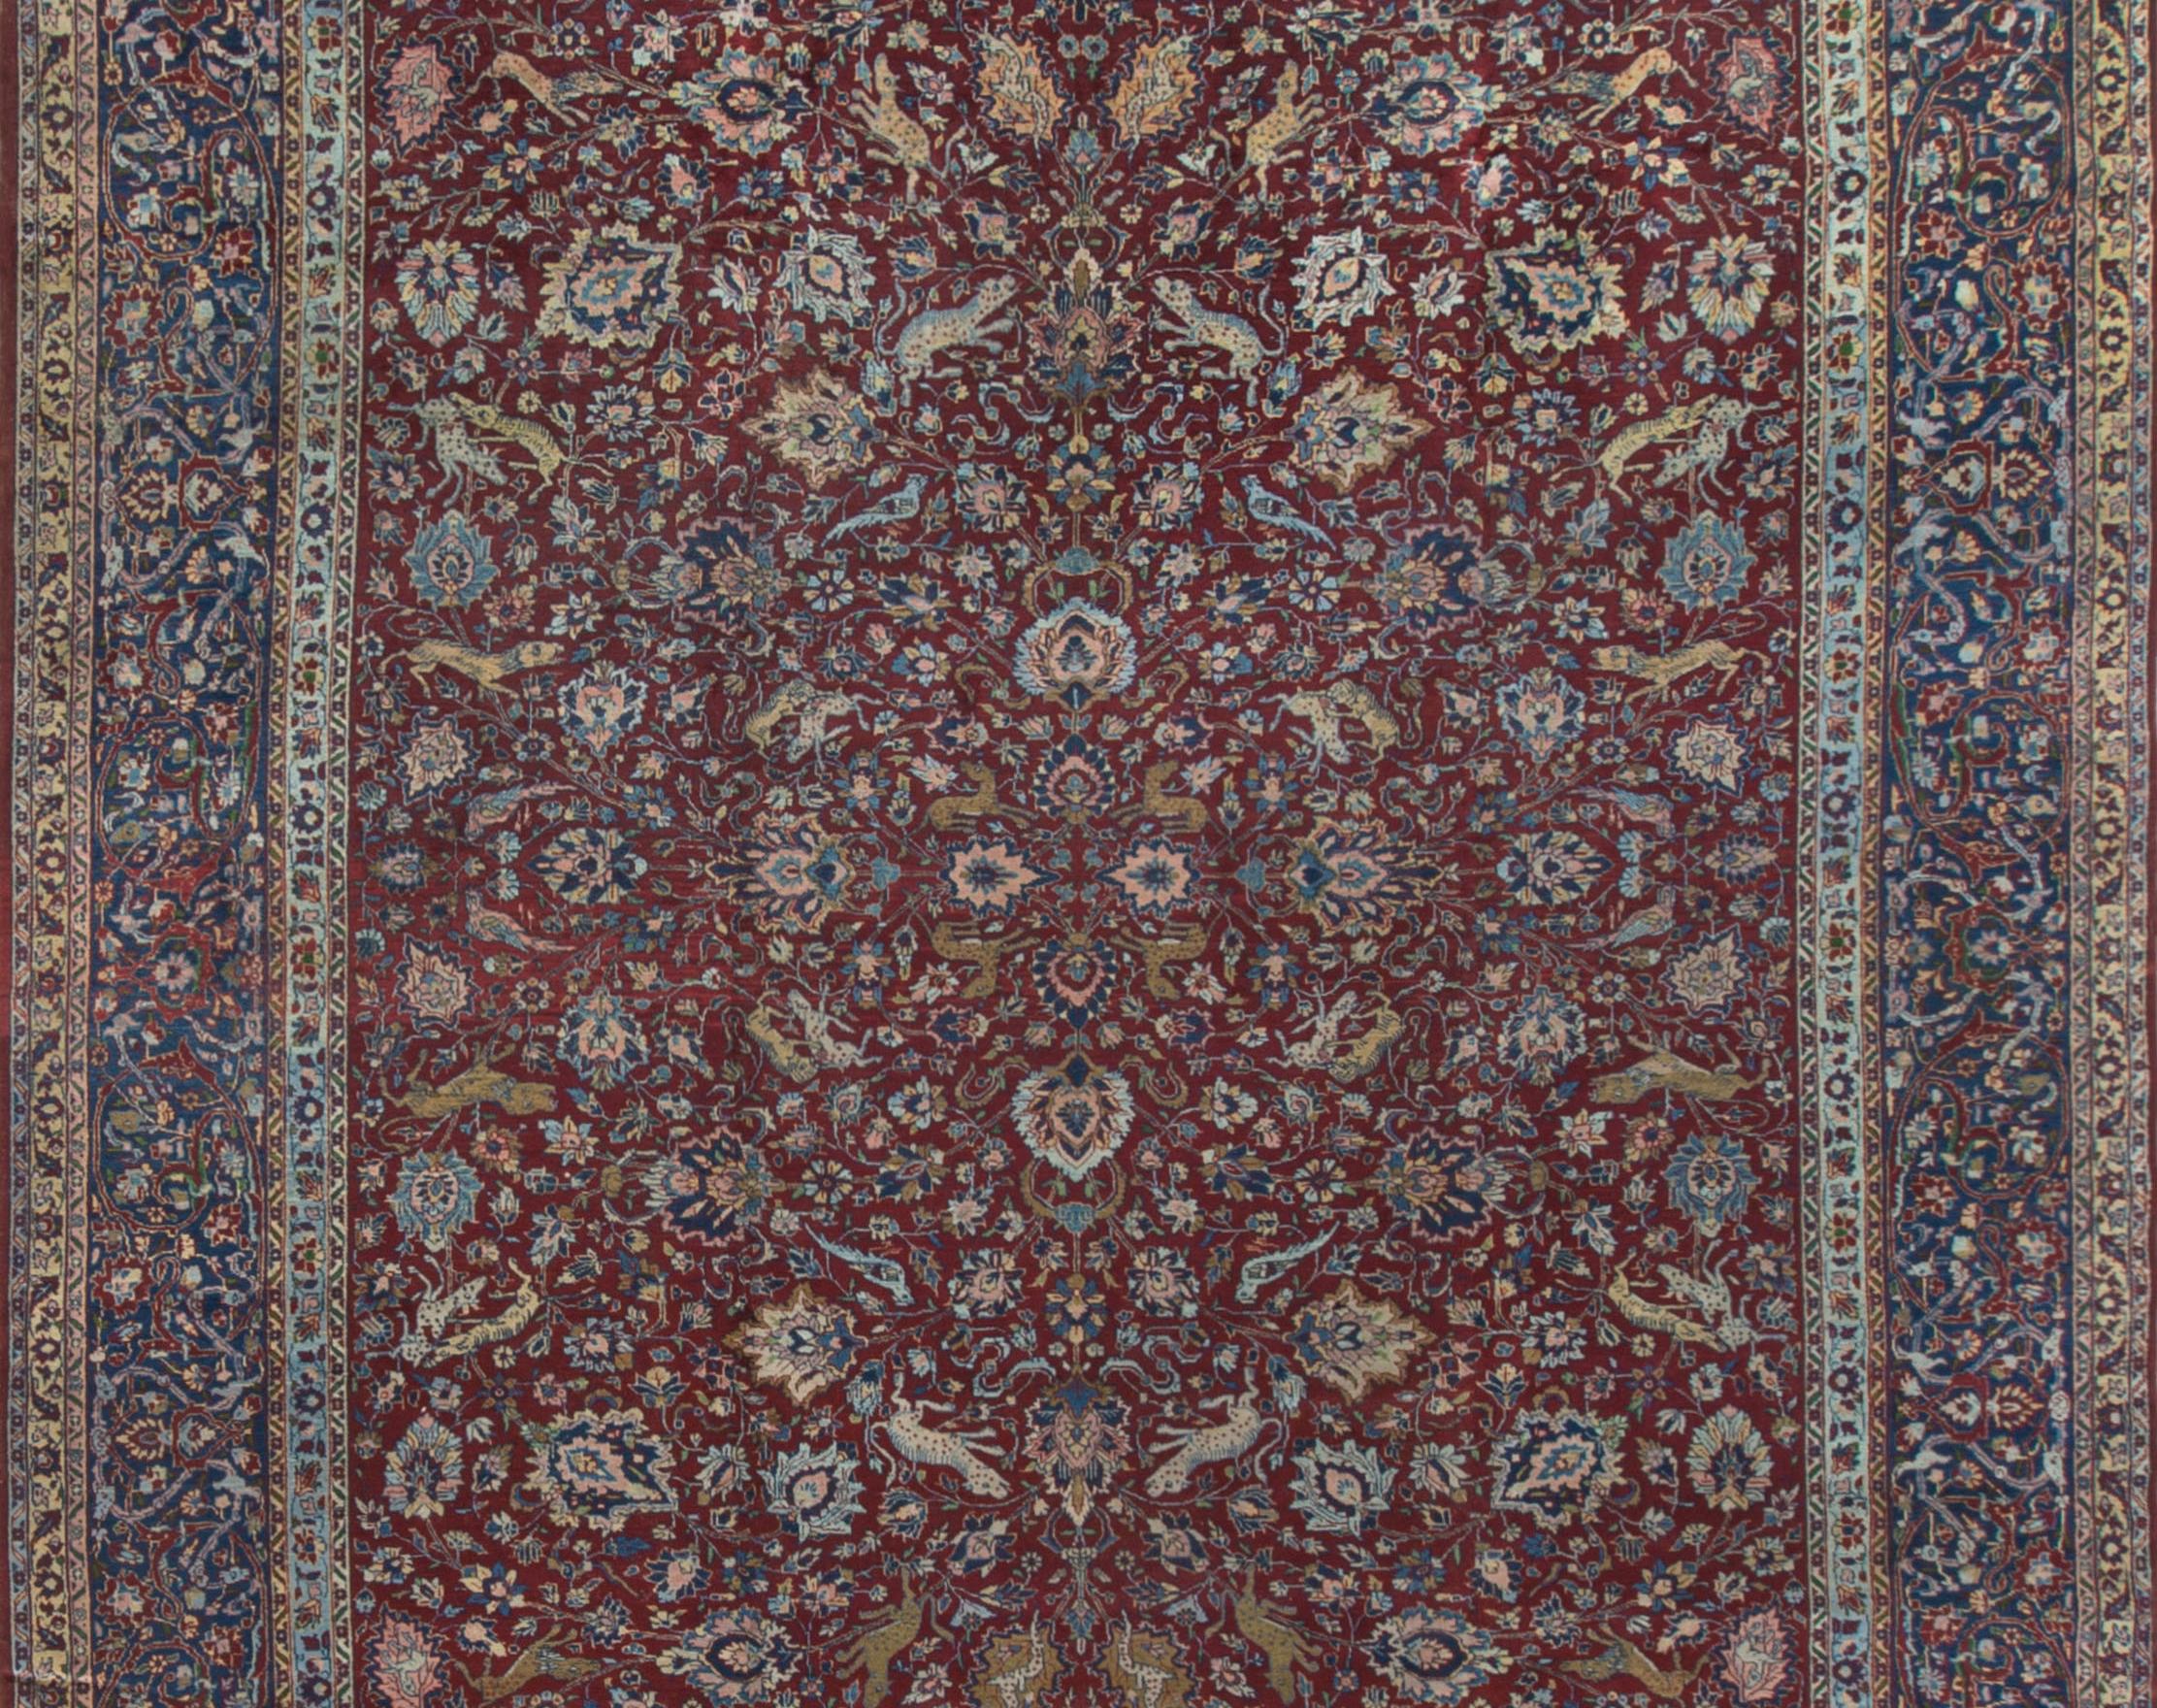 Vintage Persian Kashan Rug, circa 1920  11'9 x 17'8 In Excellent Condition For Sale In Secaucus, NJ